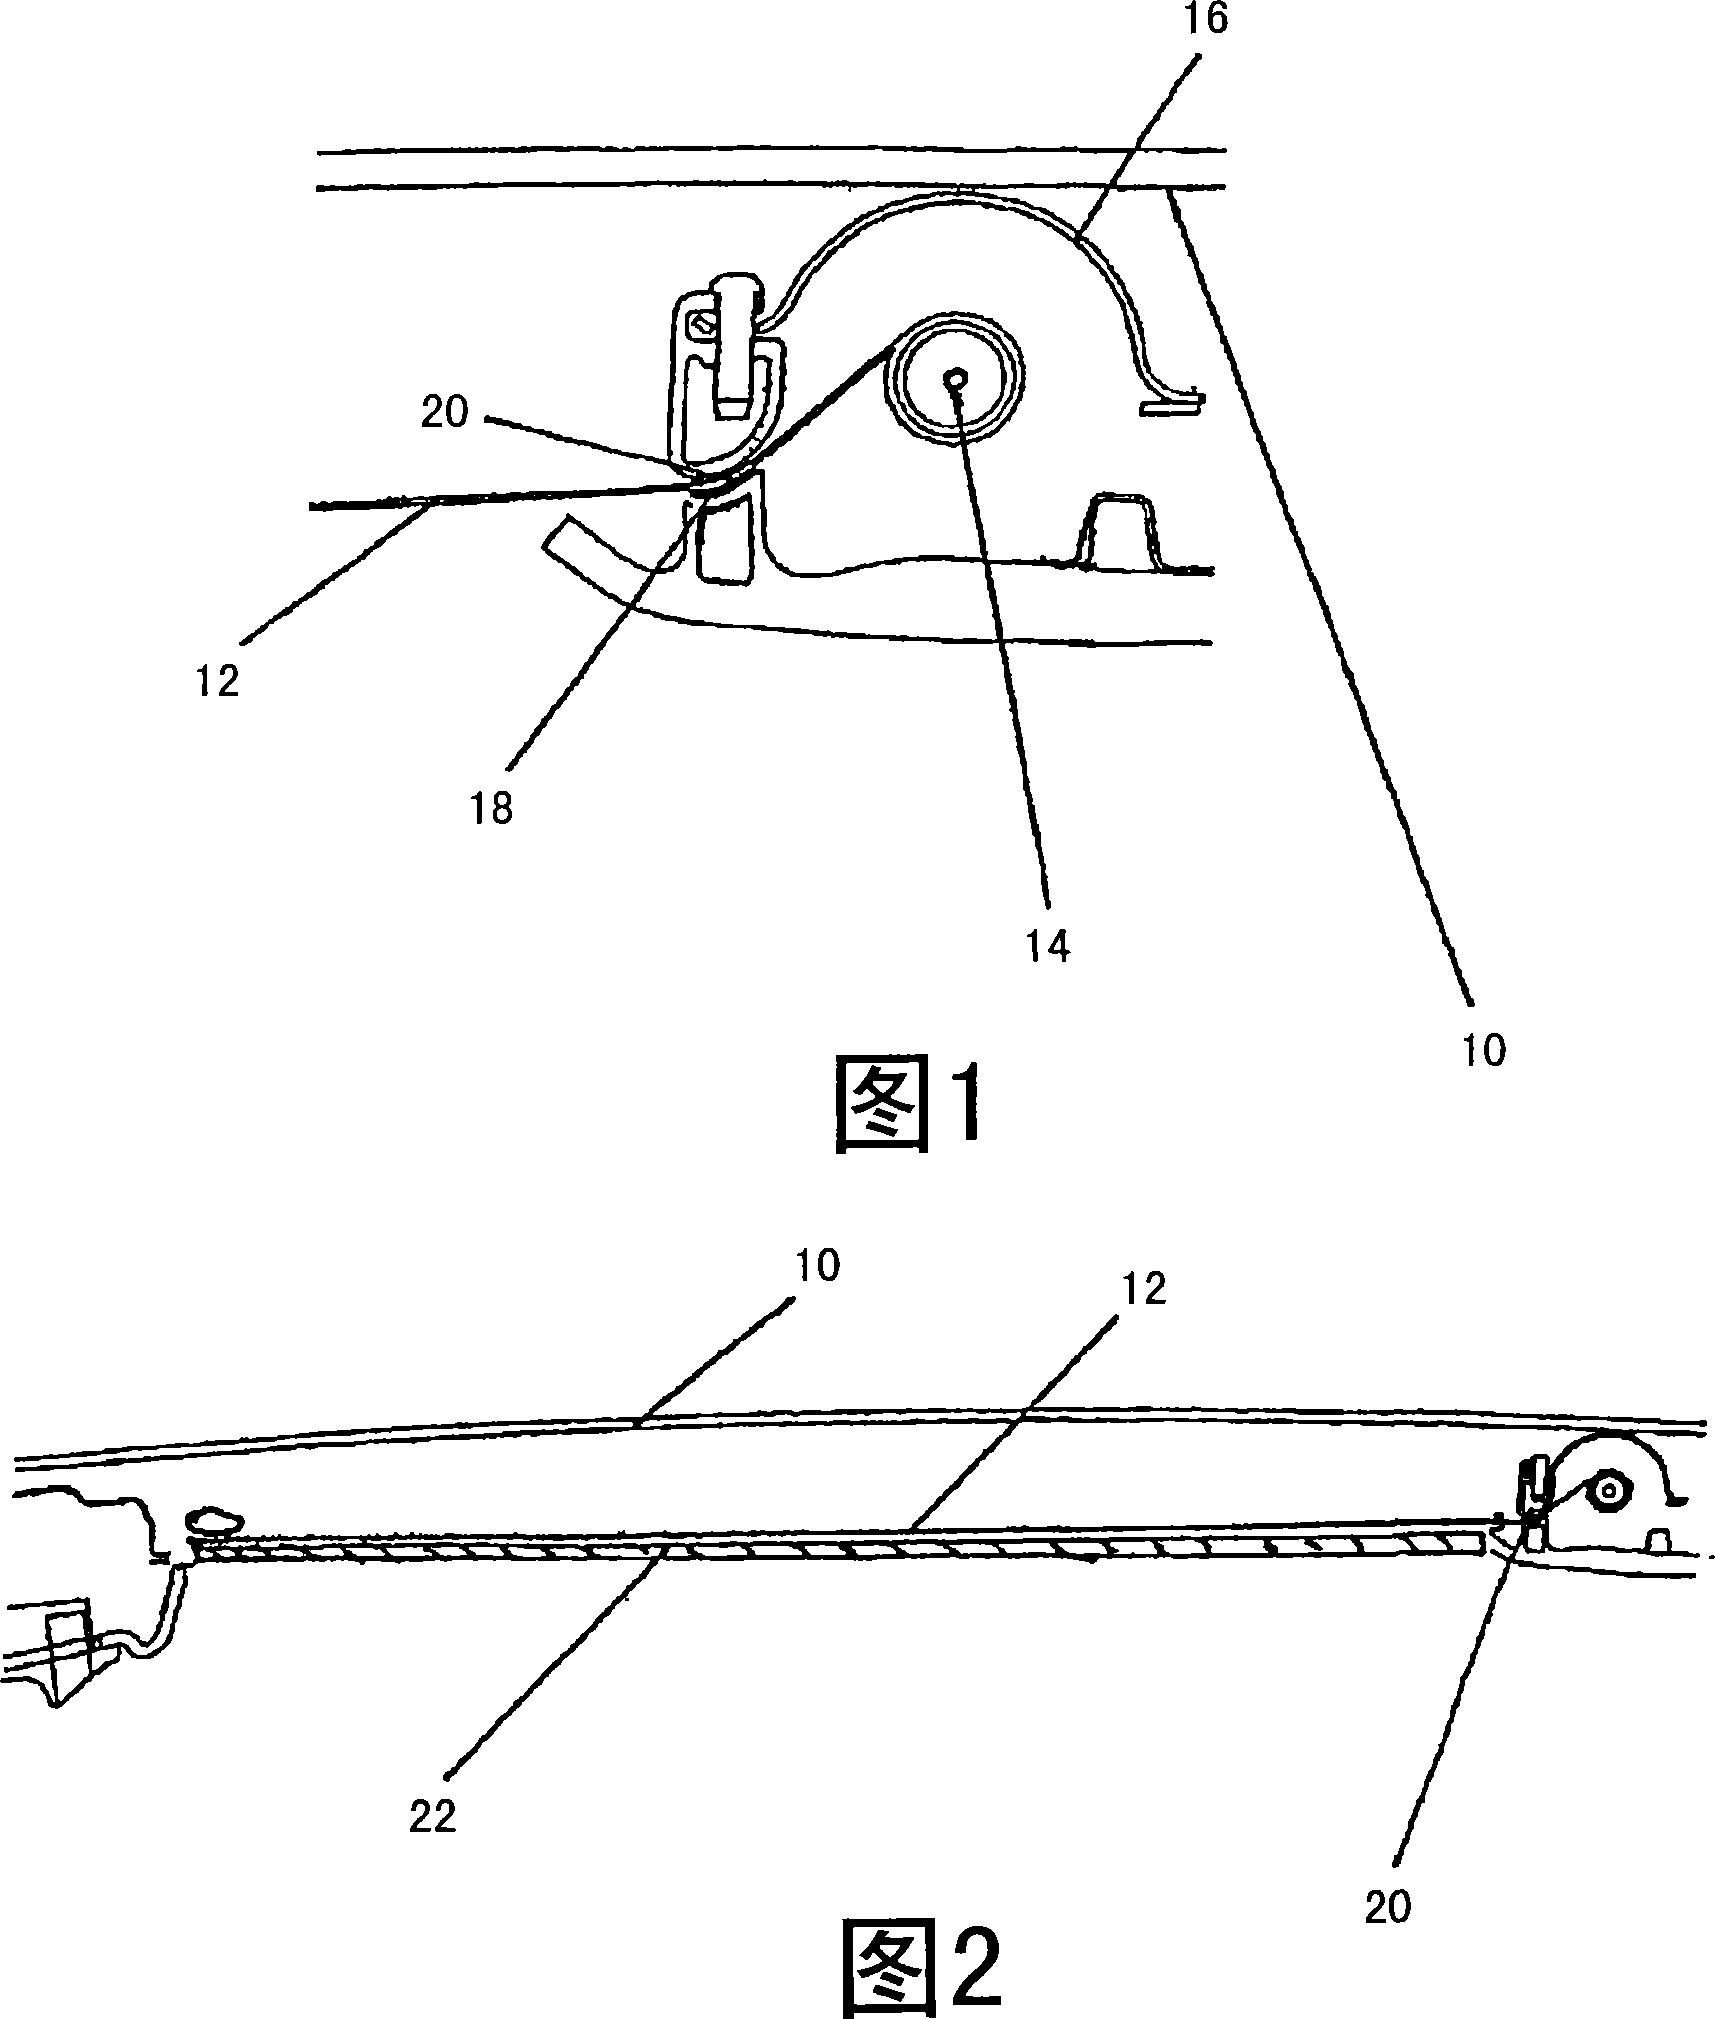 Shade assembly for a transparent bodywork surface of a vehicle